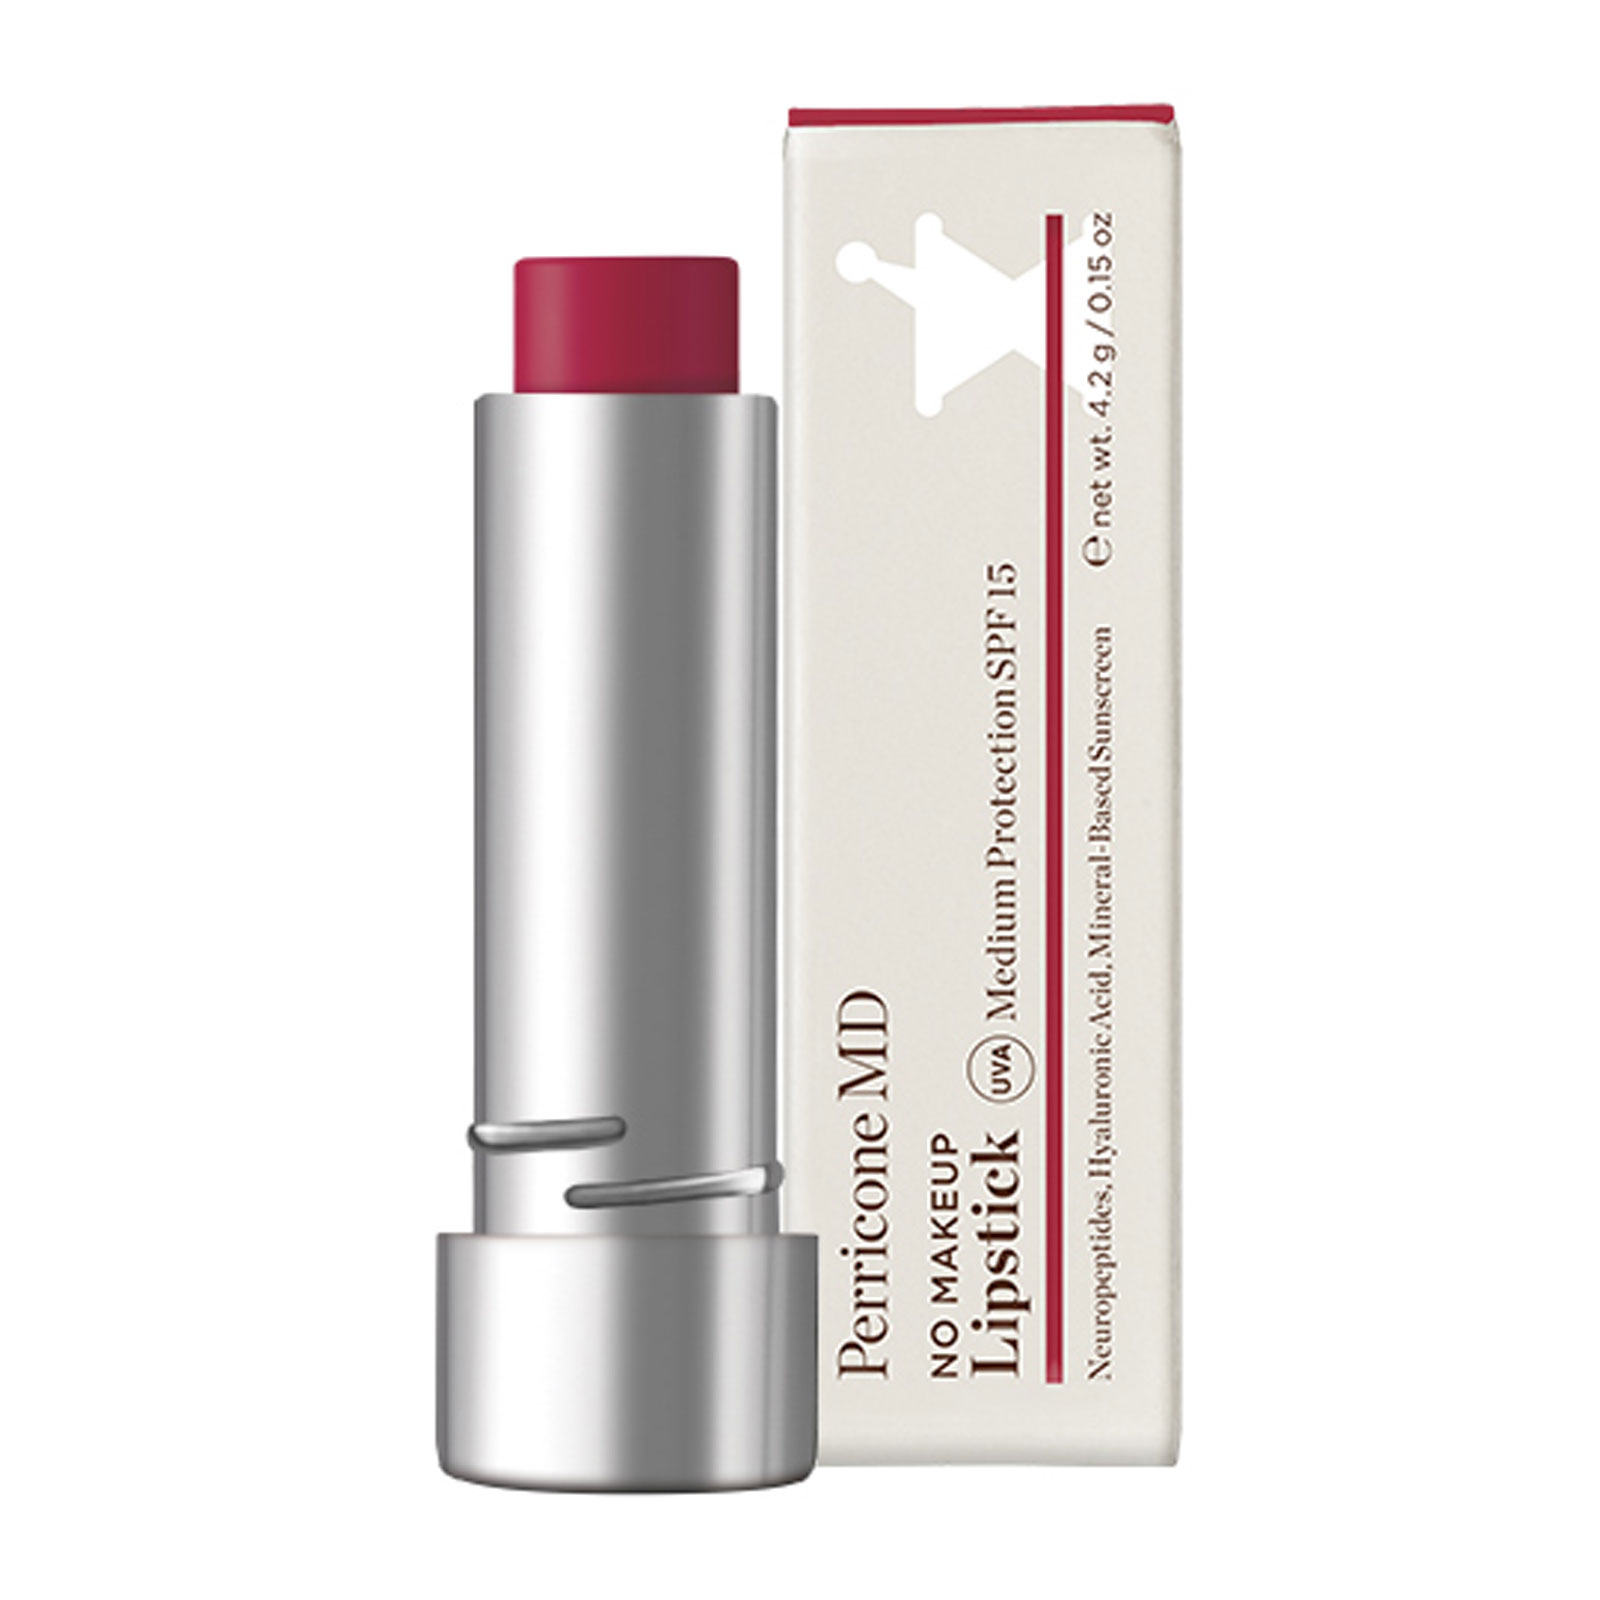 Perricone Md No Makeup Lipstick Broad Spectrum Spf15 4.2G Berry